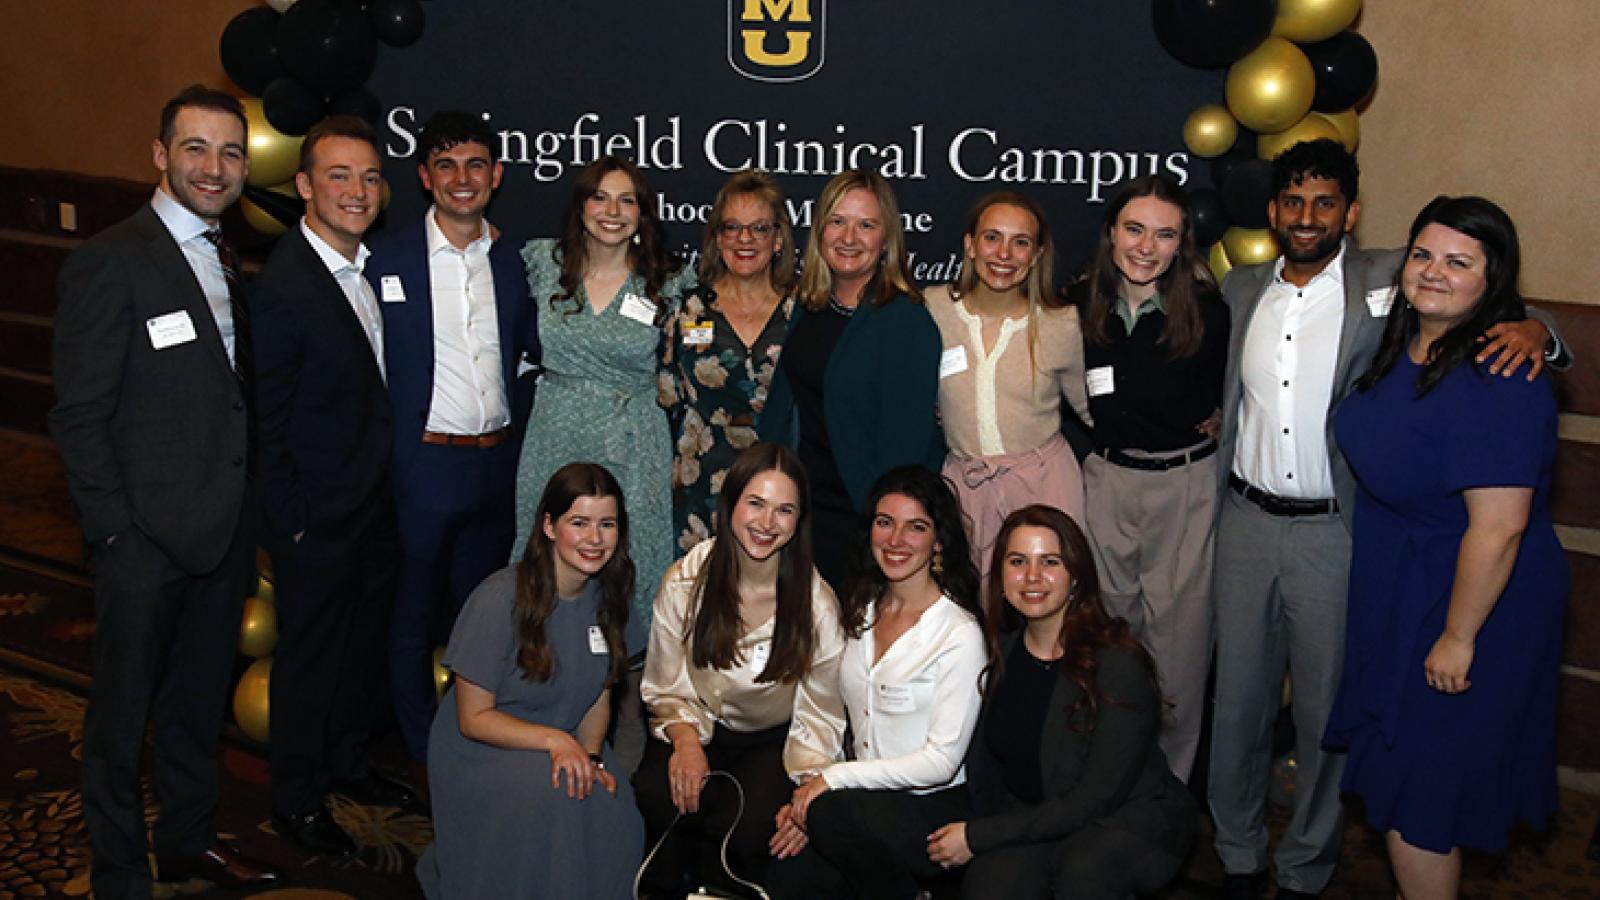 Springfield Clinical Campus students